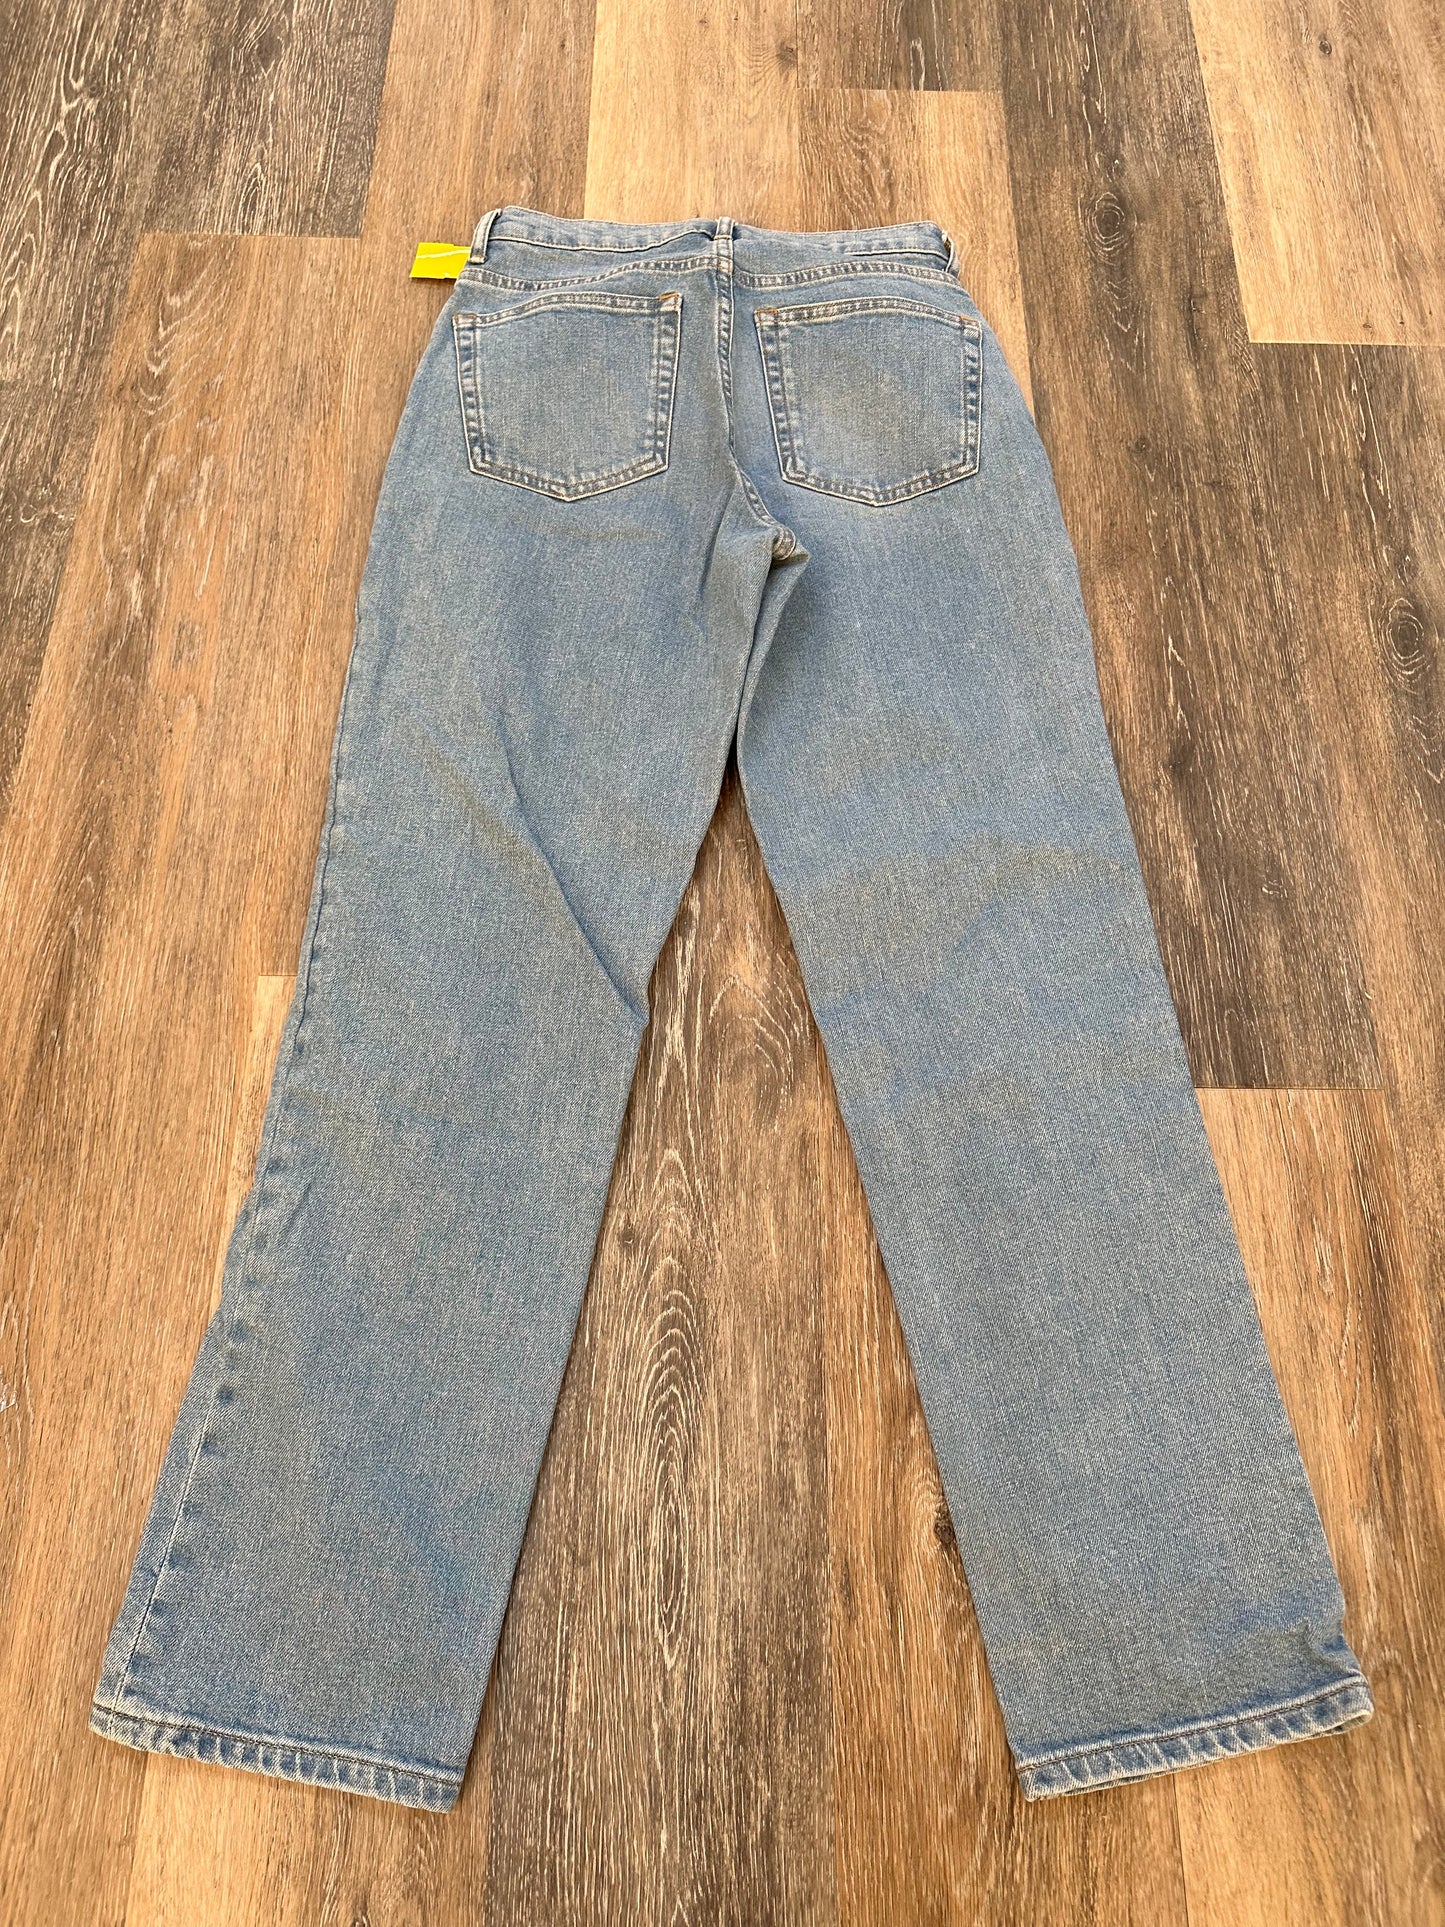 Jeans Relaxed/boyfriend By Everlane  Size: 0